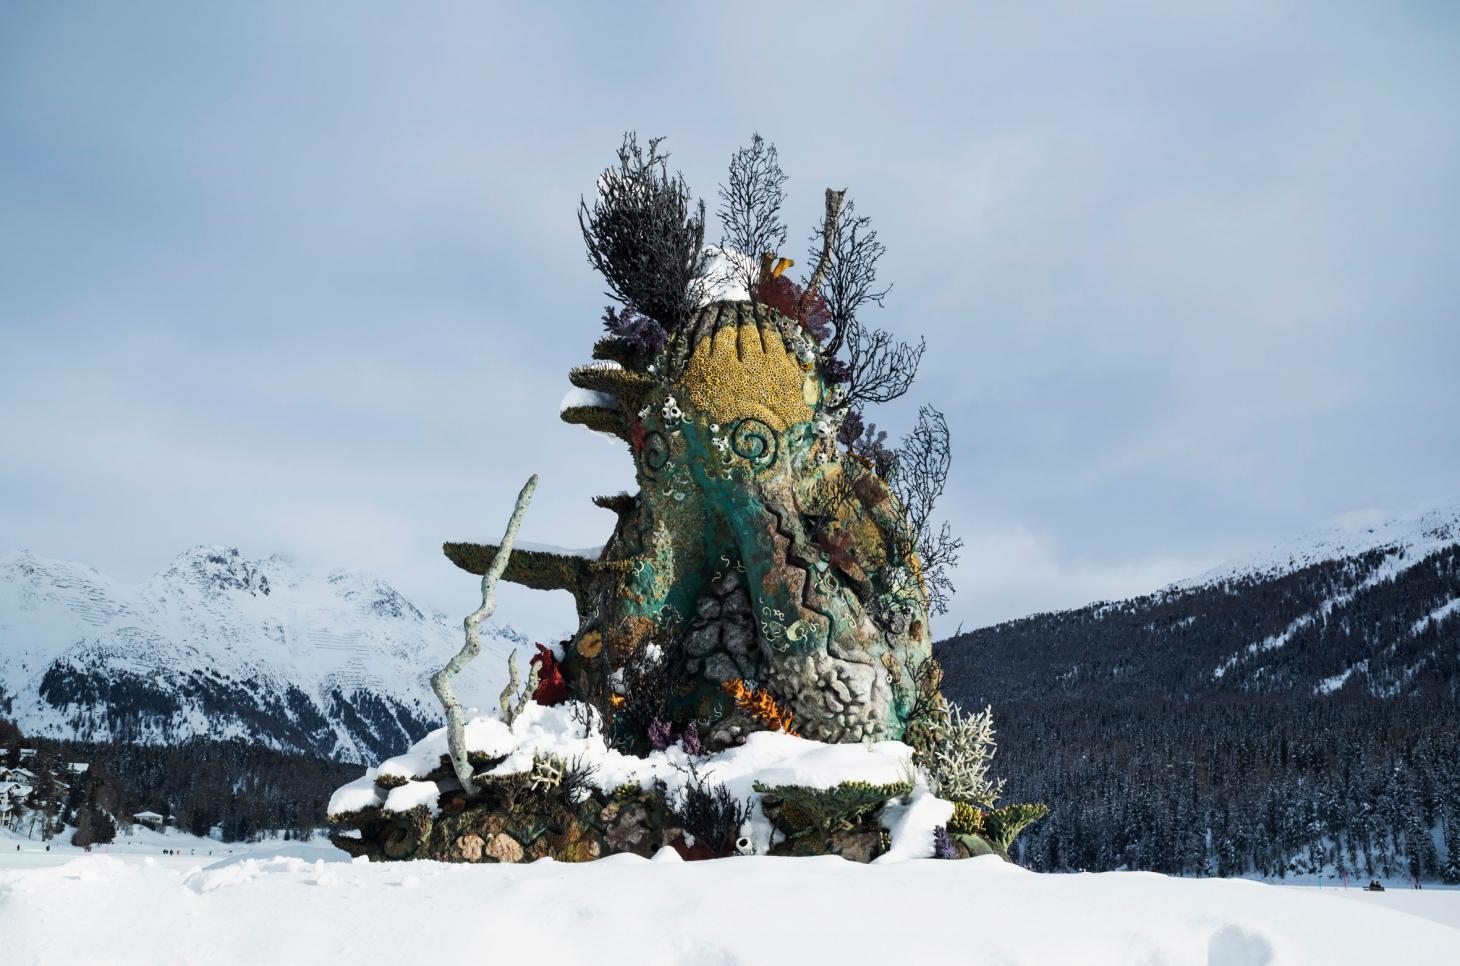 Damien Hirst, The Monk, 2014. Installed in St Moritz, 2021. Photographed by Felix Friedmann © Damien Hirst and Science Ltd. All rights reserved, DACS 2021